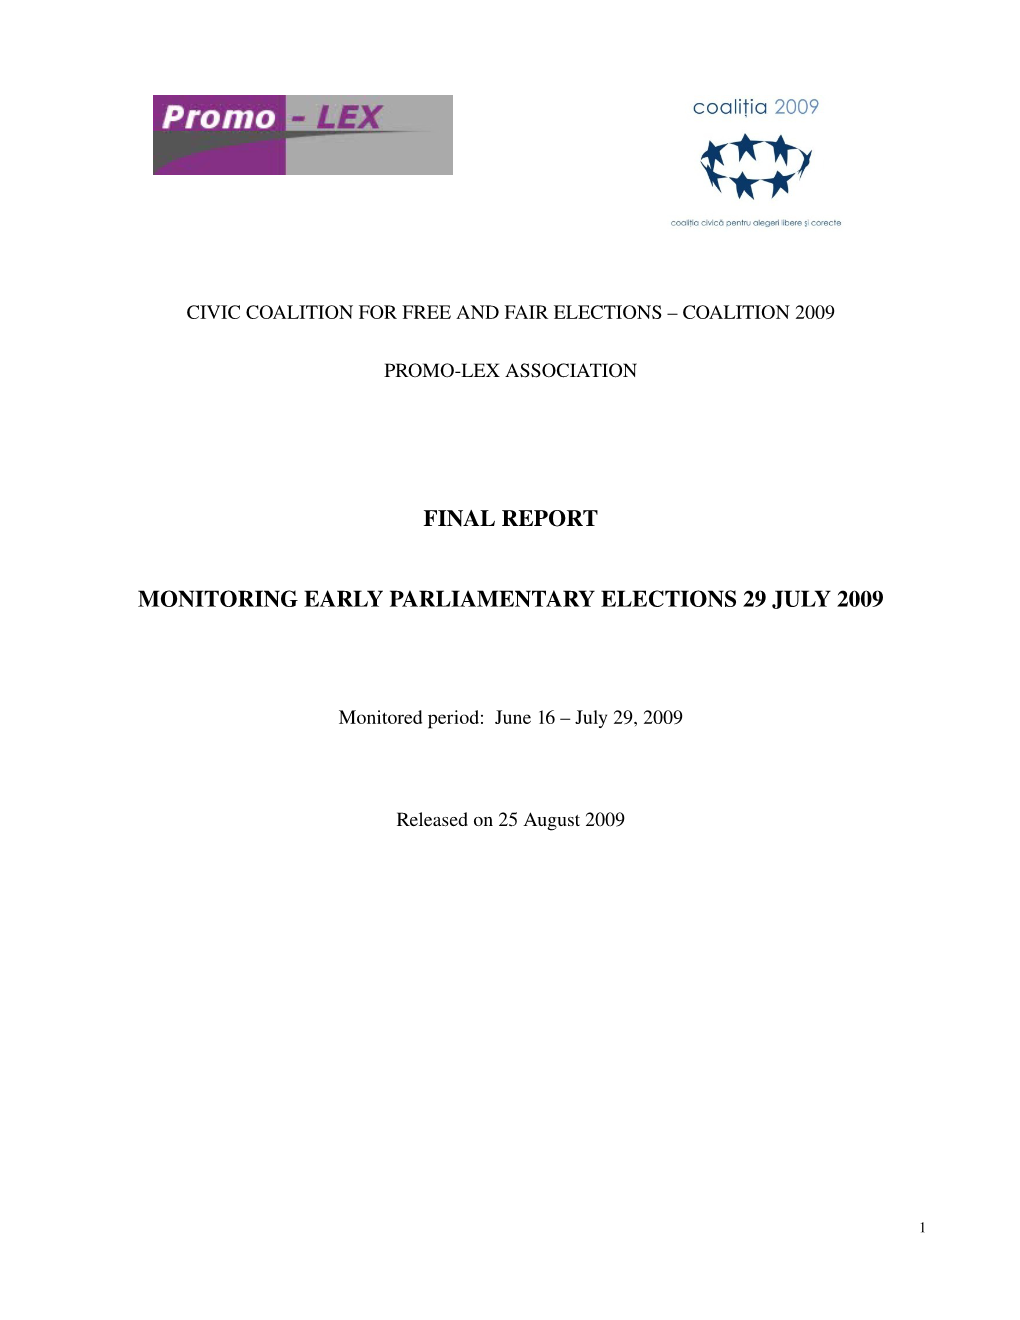 Final Report Monitoring Early Parliamentary